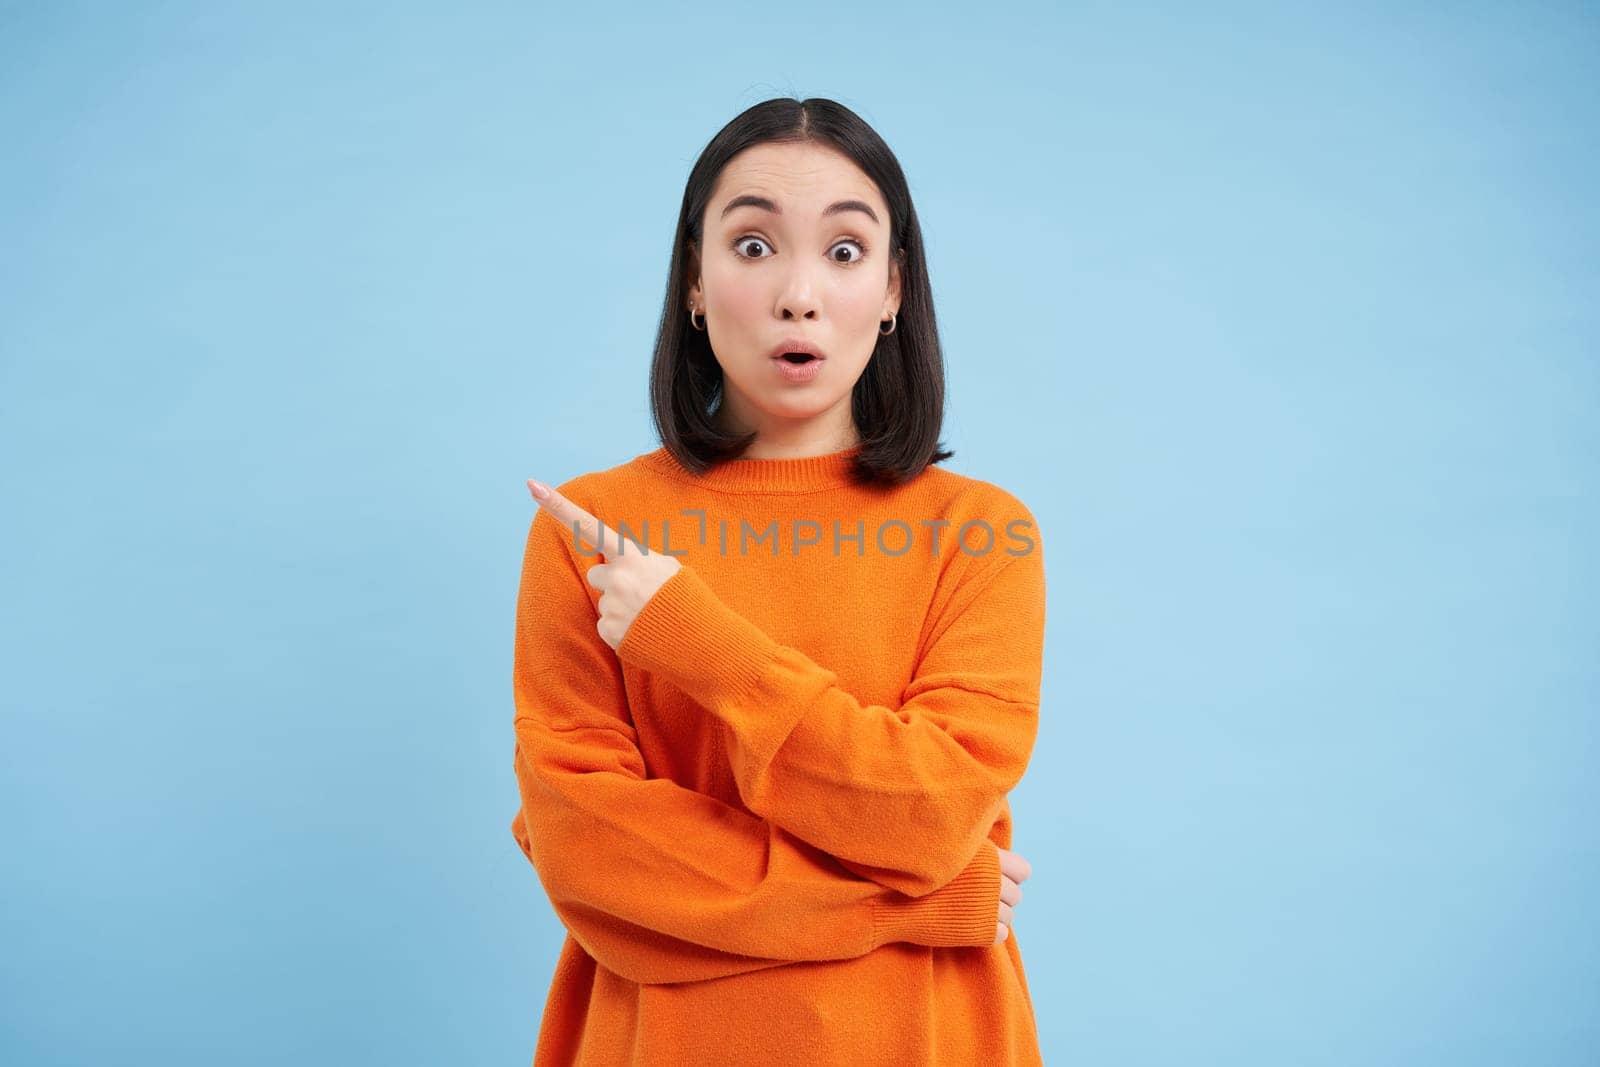 Surprised asian girl points left, shows advertisement with amazed face, shocked by promo offer aside on blue background.